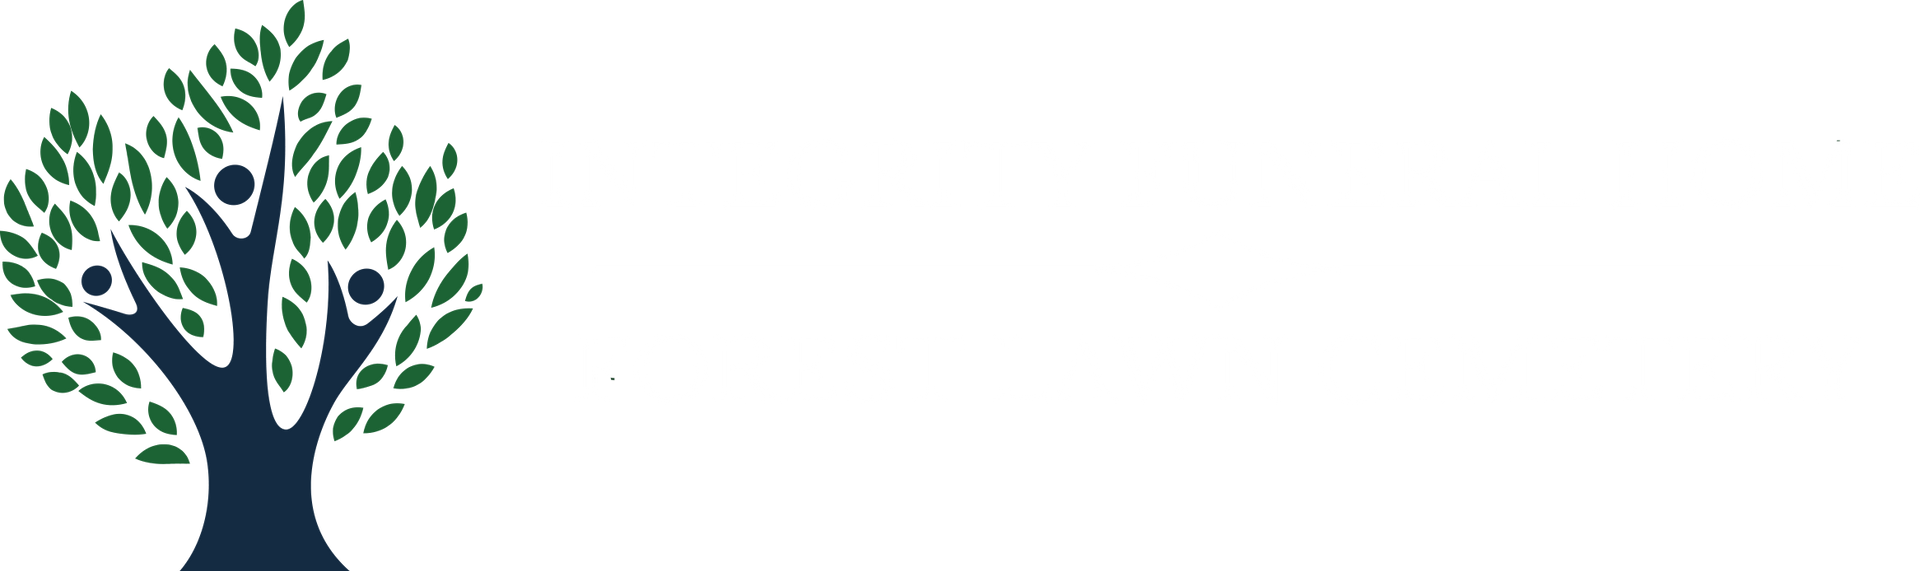 Integrity Funeral Home at Forest Lawn Cemetery Logo